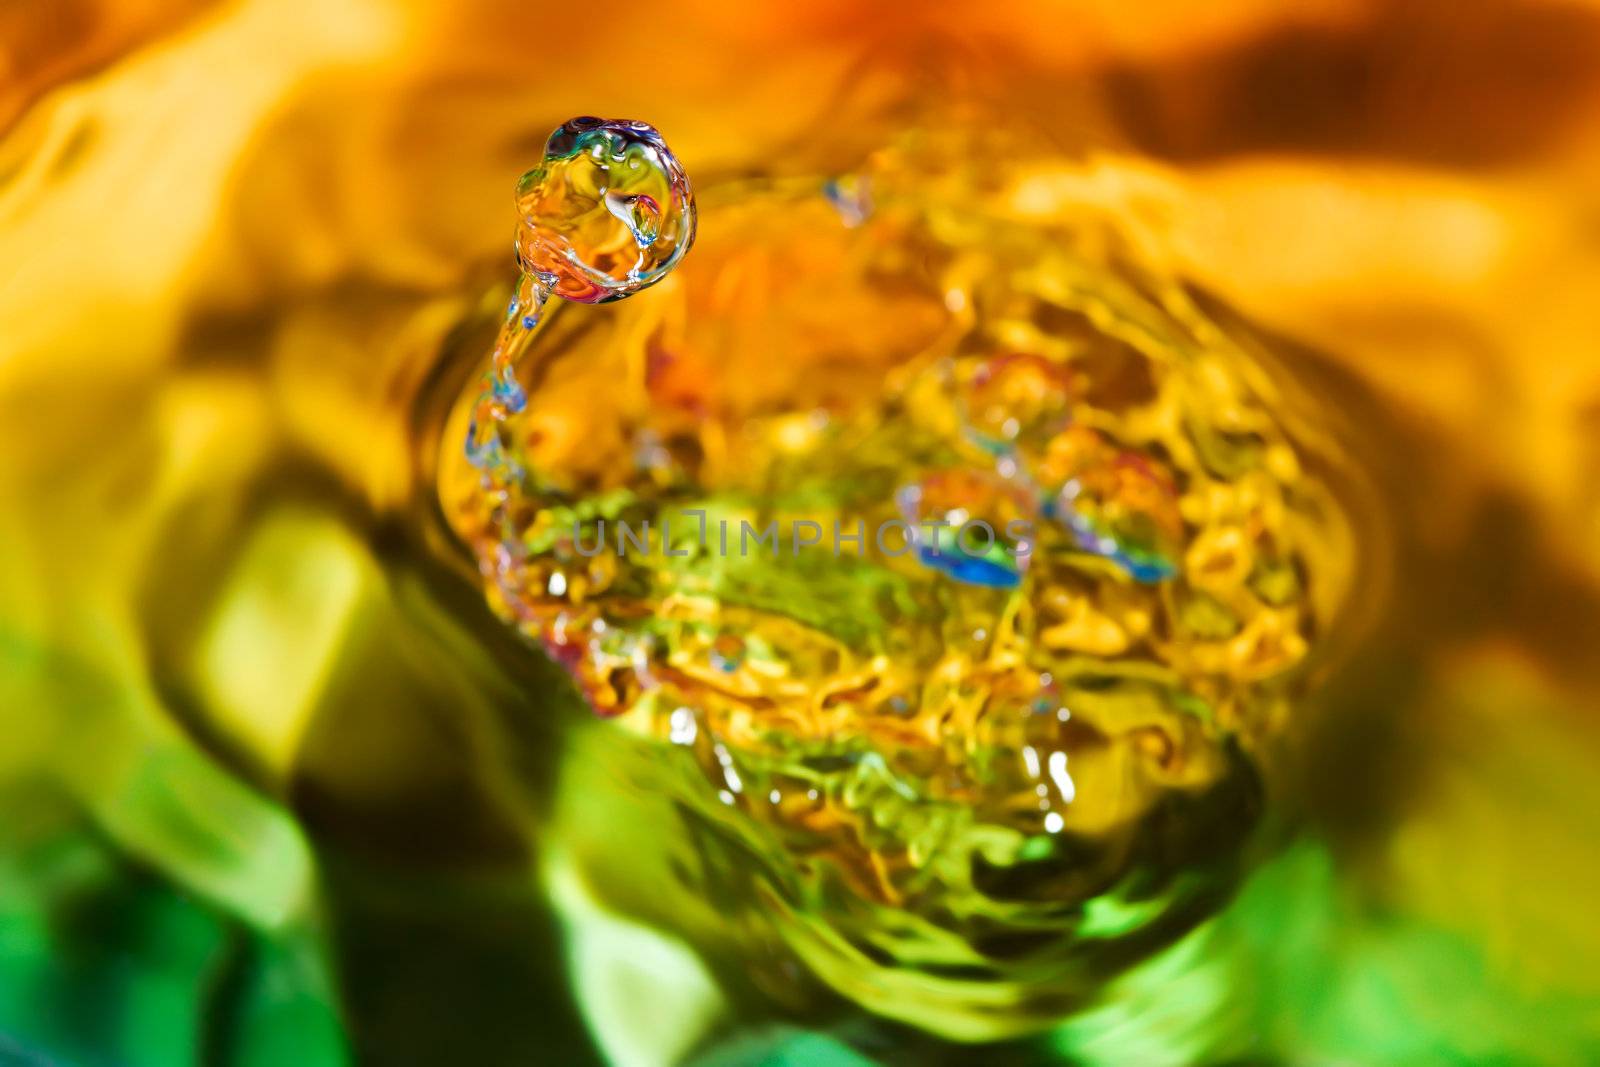 Colorful and Creative Water Drop Creations by Coffee999